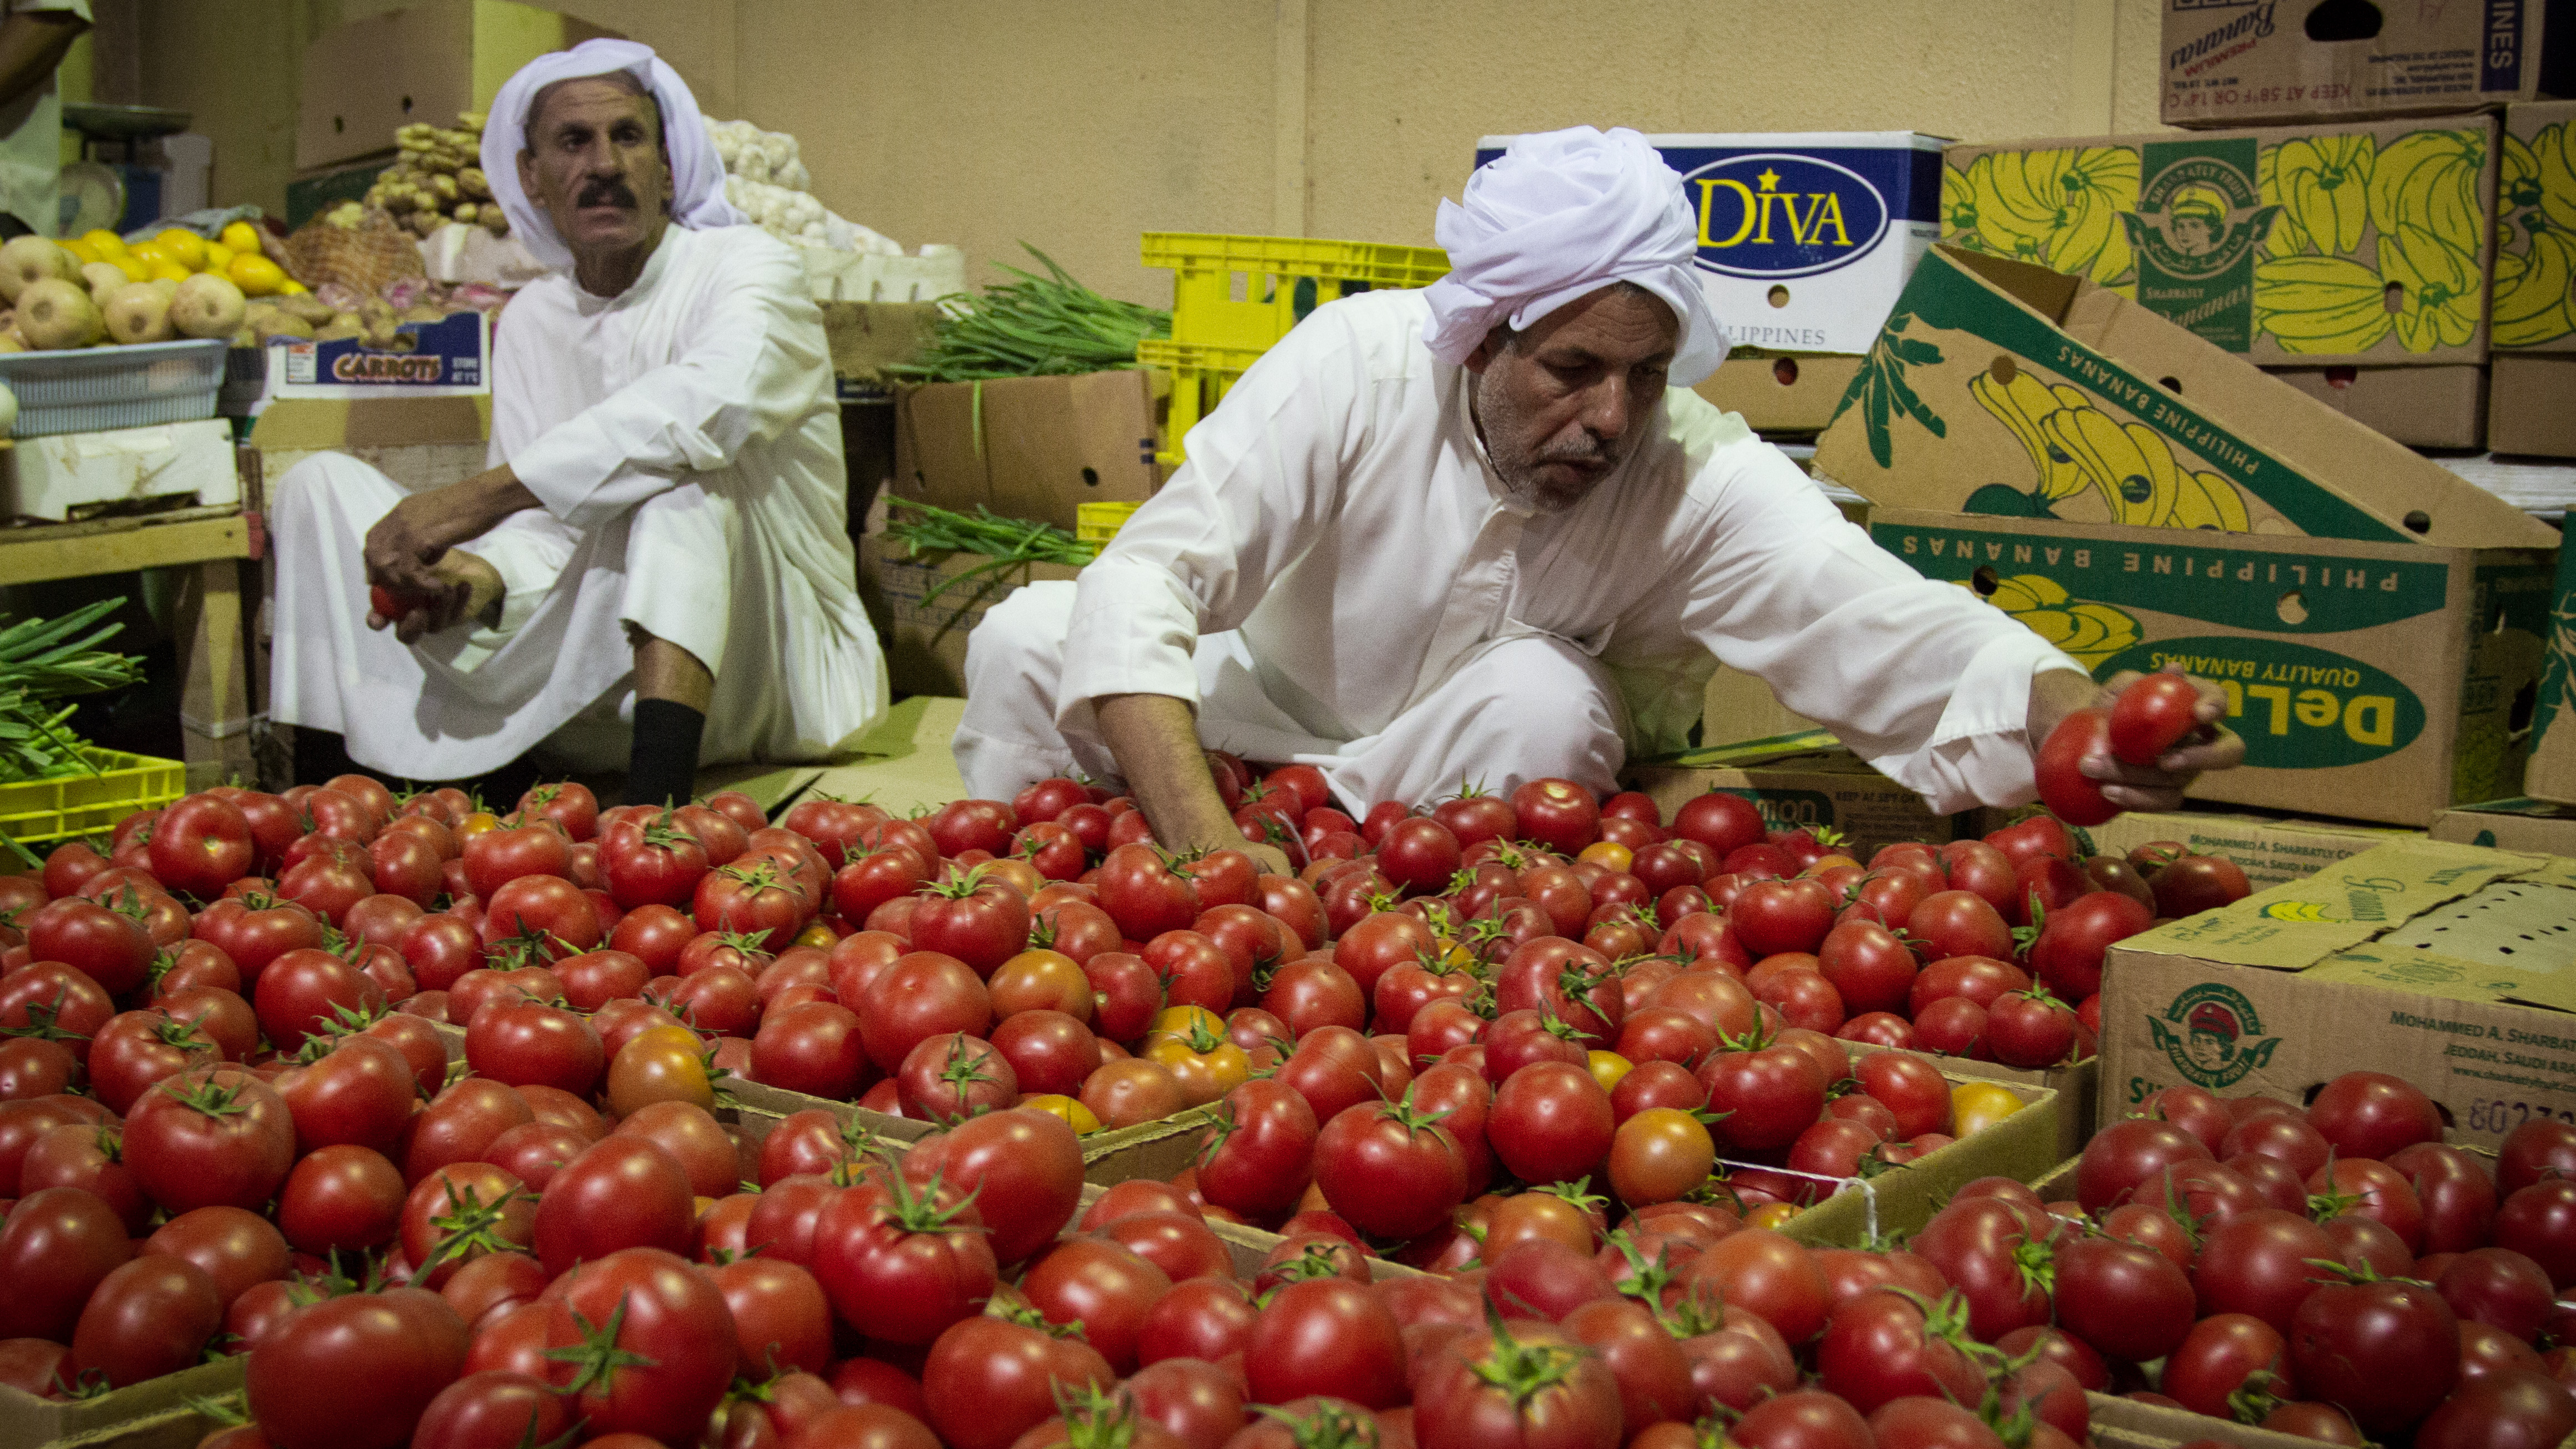 A Bahraini vendor sells his farm crop of tomatoes in the central market in Bahrain. Photo by Hussain Albahrani/Pacific Press/ LightRocket via Getty Images.